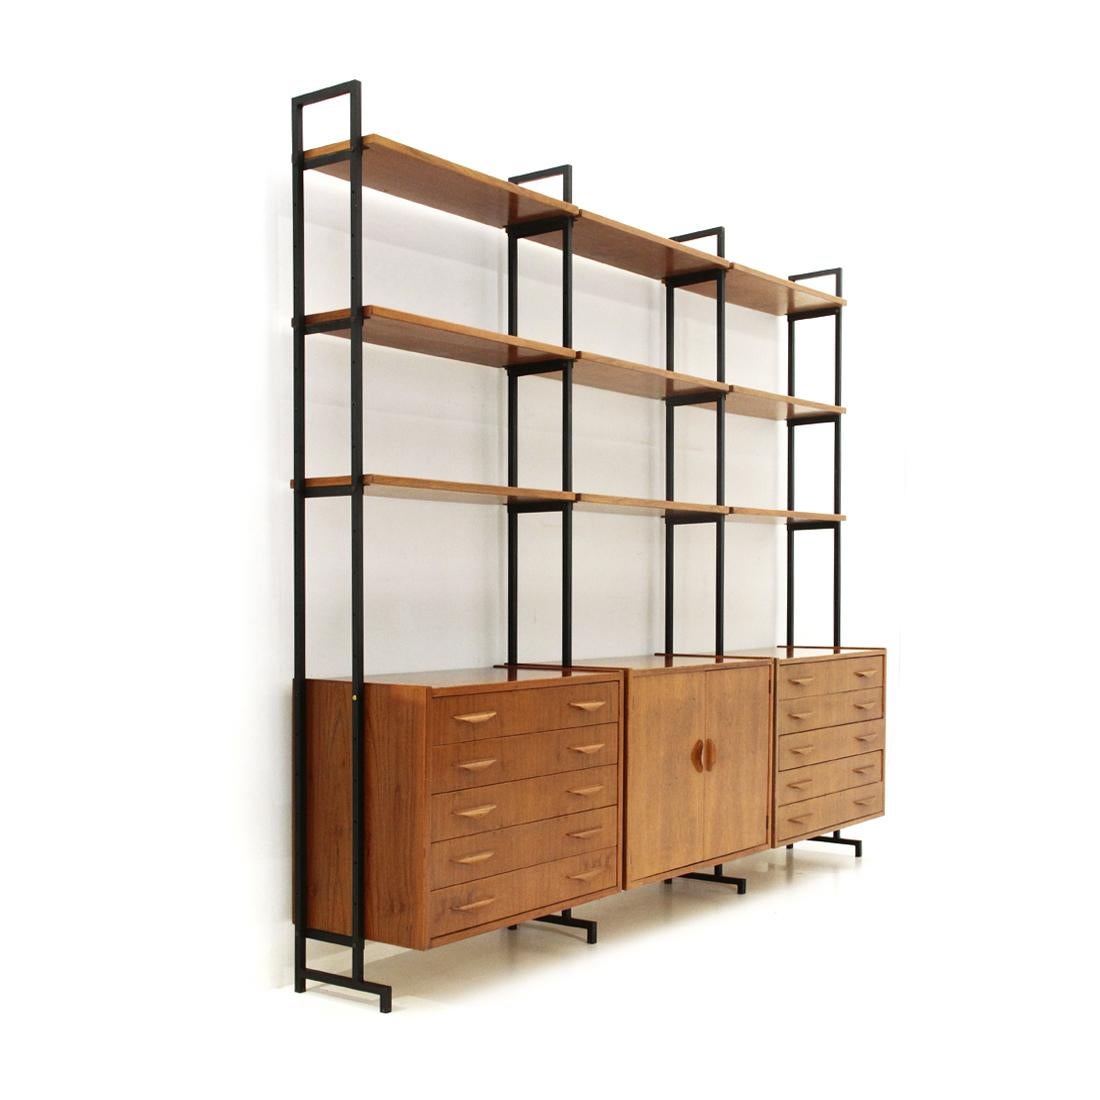 Italian-made bookcase produced in the 1960s.
Uprights in black painted metal.
9 shelves and 3 storage compartments in veneered wood.
2 chest of drawers with 5 drawers.
Storage compartment with internal shelf.
Handles in shaped wood.
Good